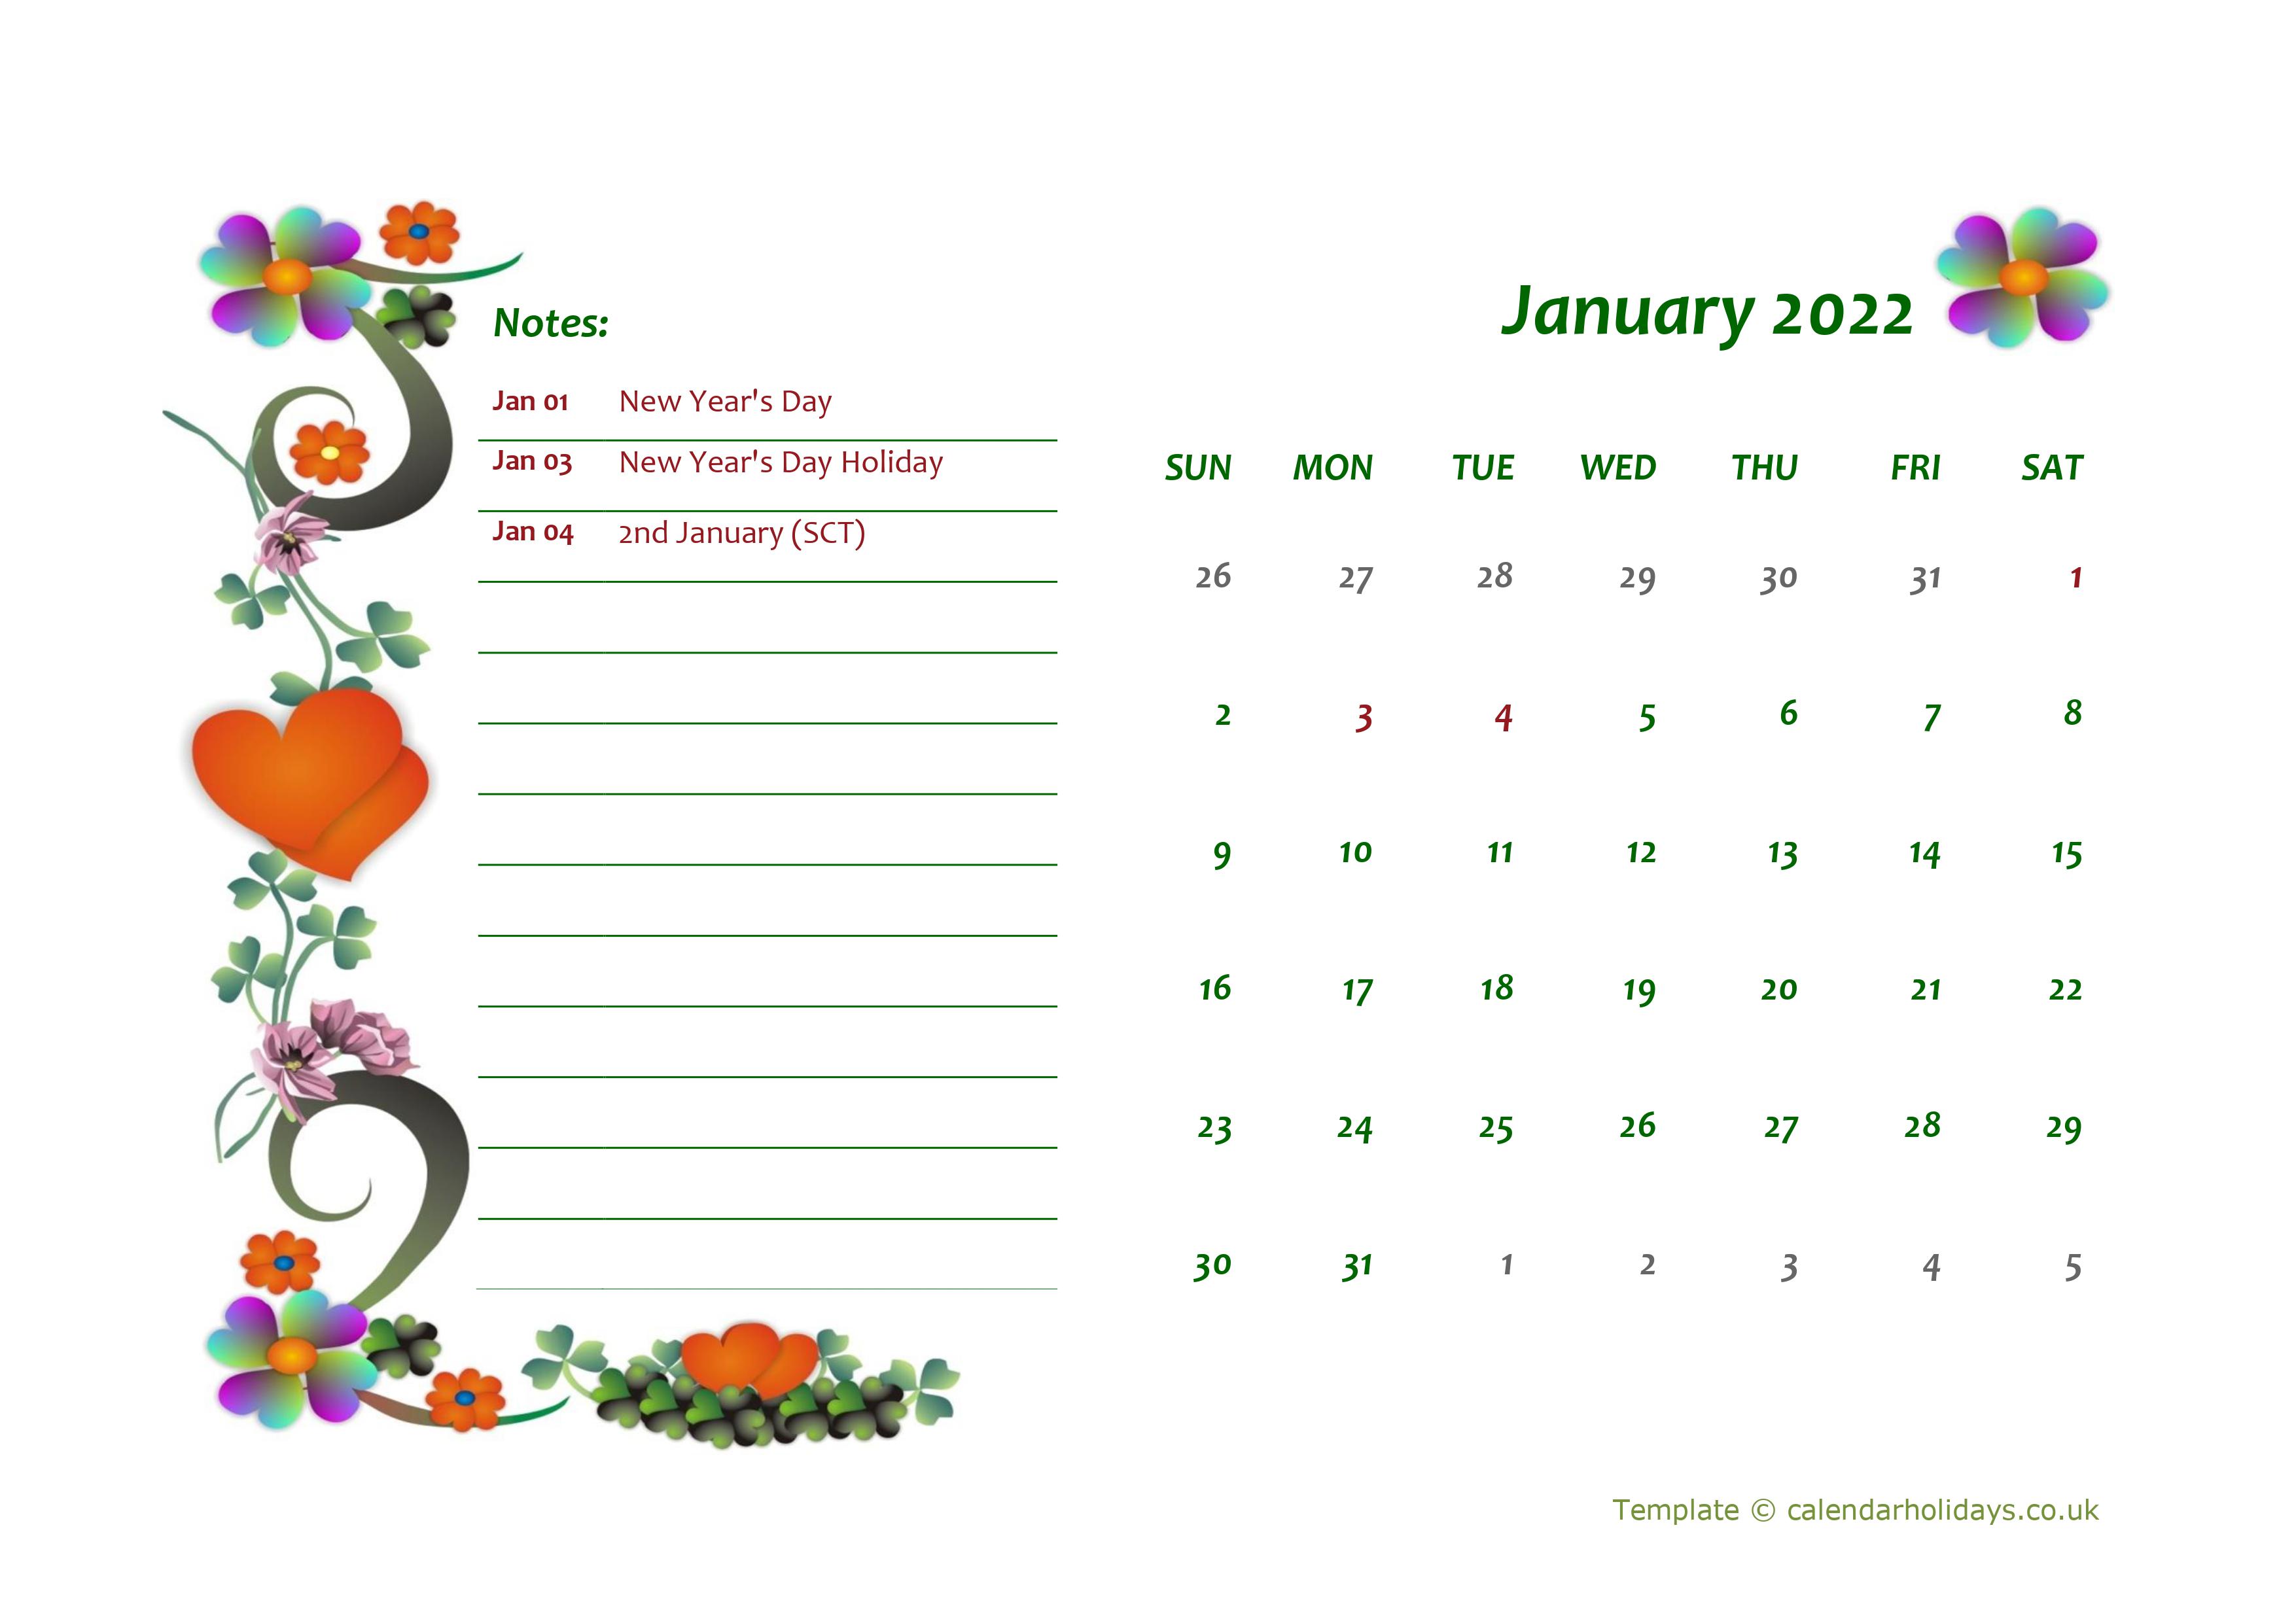 Free Printable Monthly Calendar 2022 With Holidays 2022 Monthly Template - Calendarholidays.co.uk